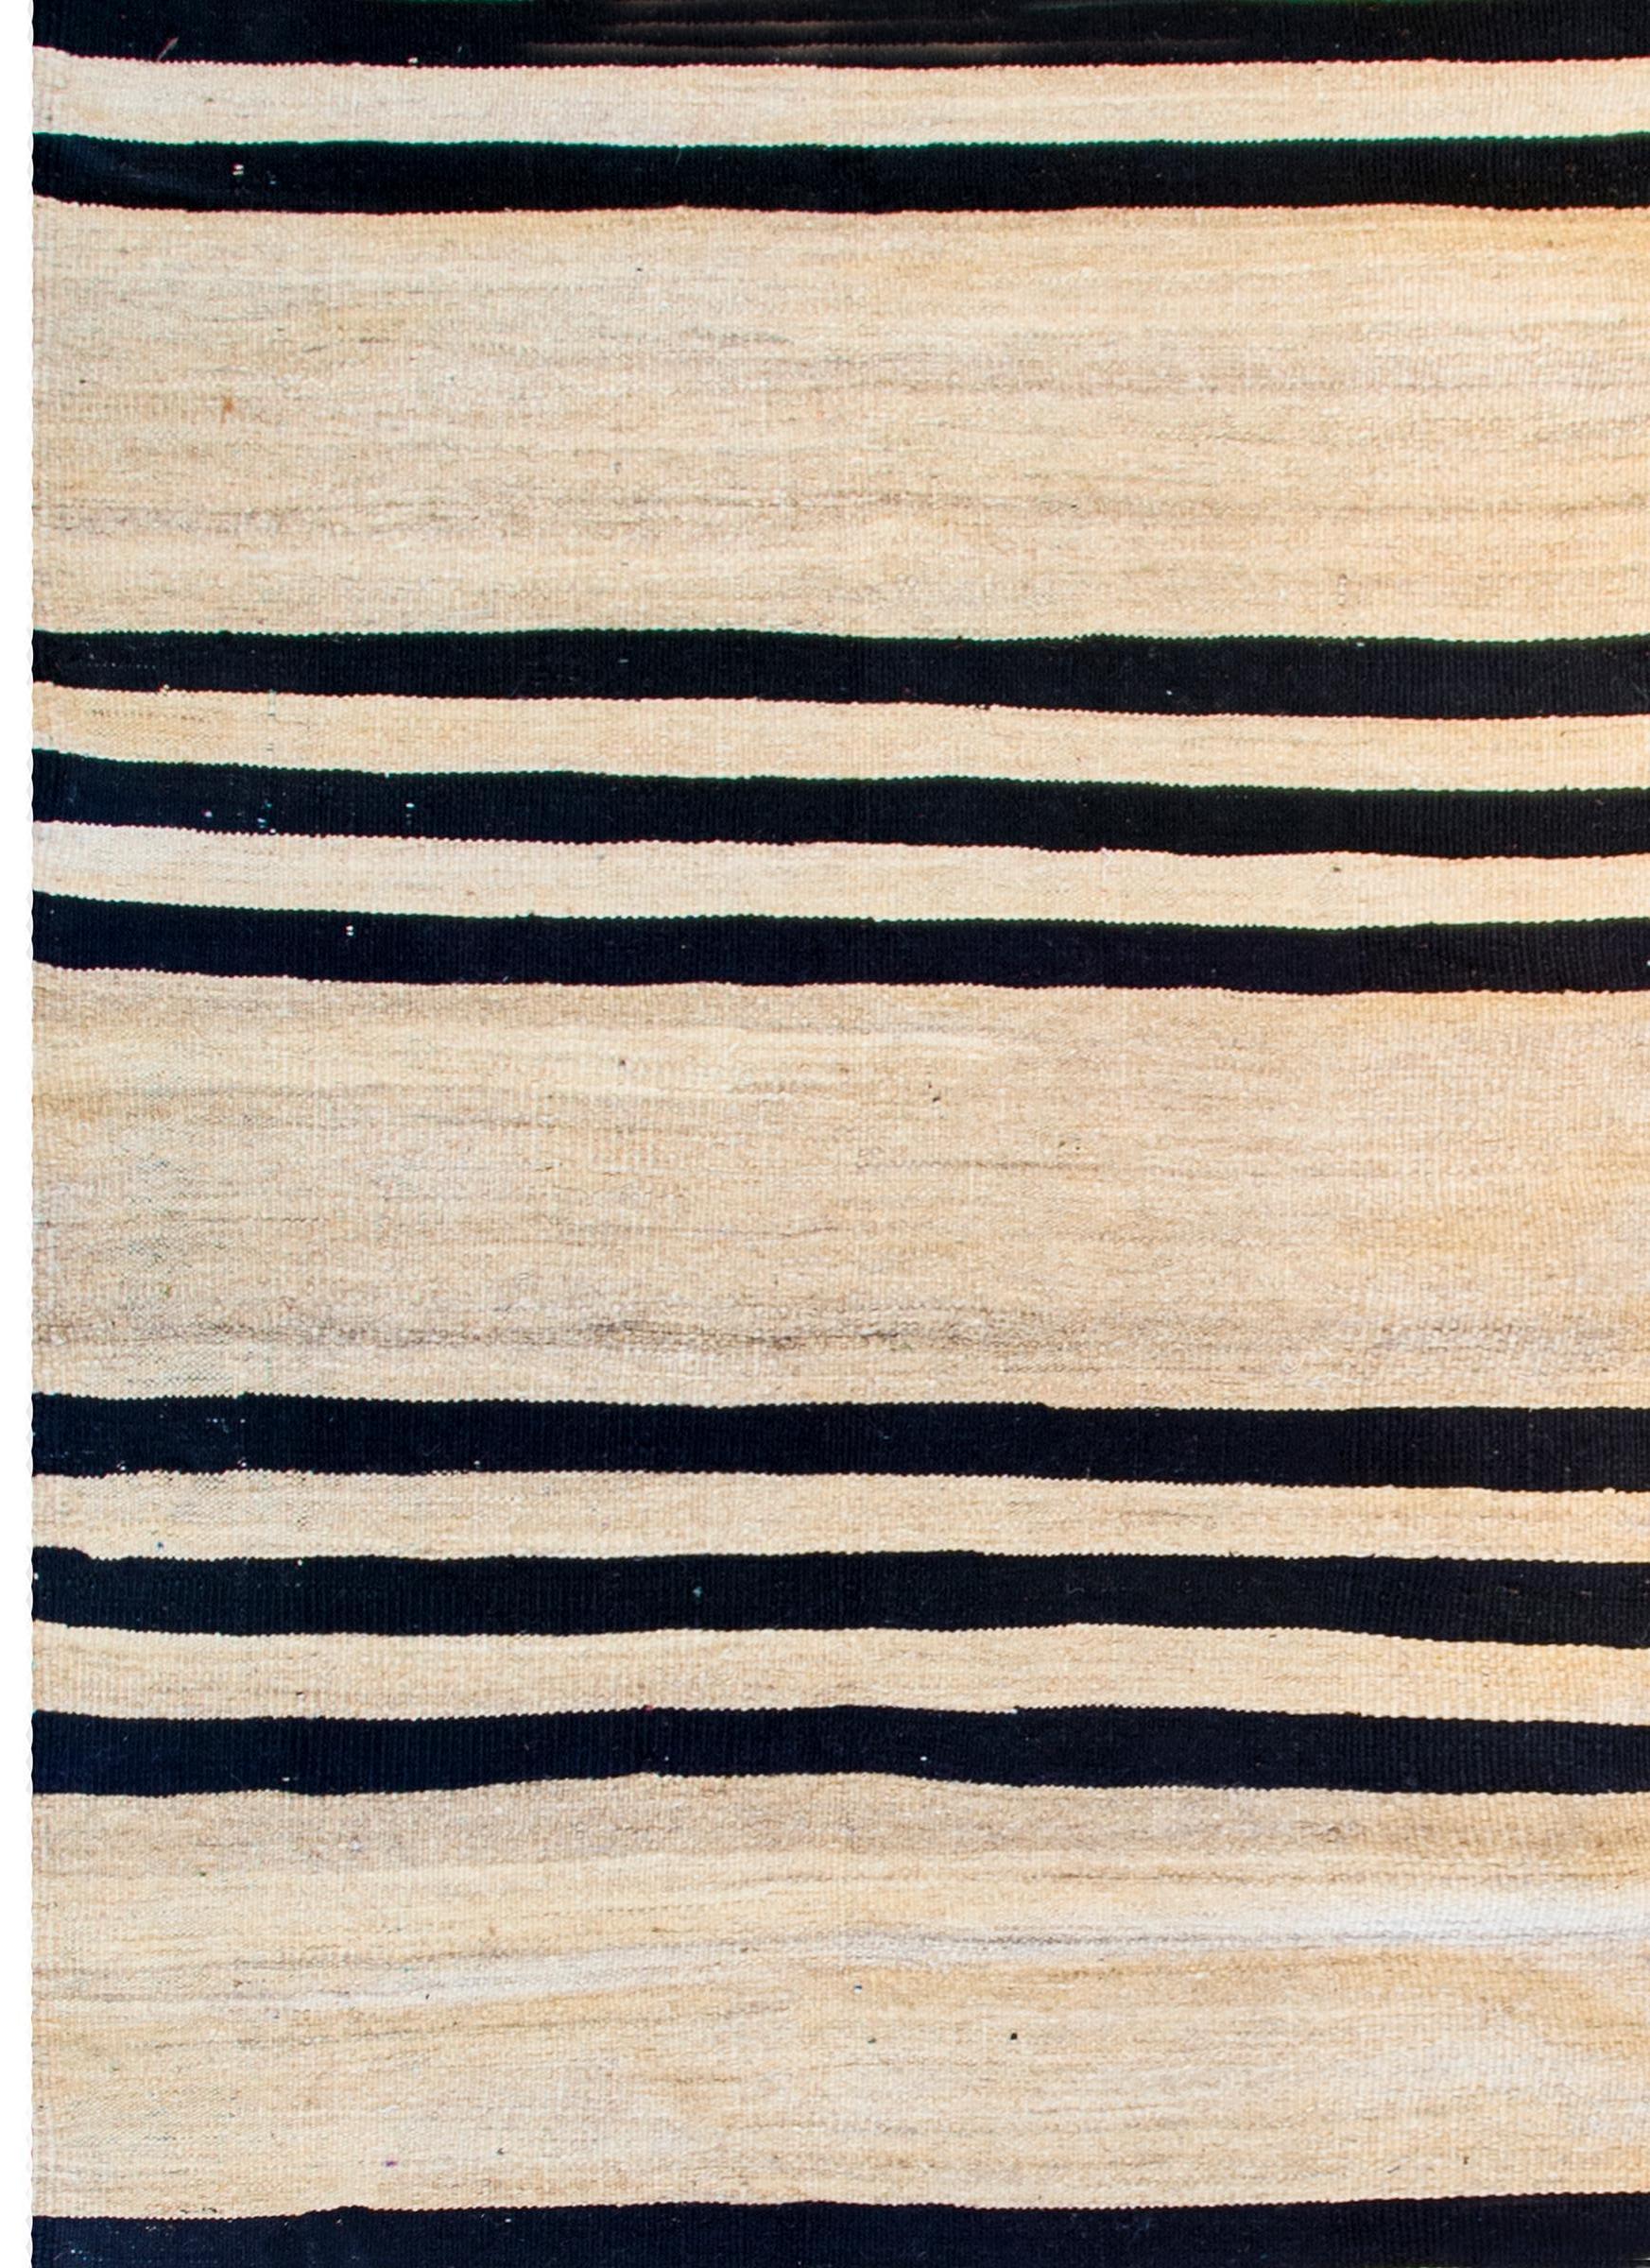 A wonderful early mid-20th century Persian Gabbeh Kilim runner with a bold horizontal stripe pattern with alternating black and natural wool stripes.